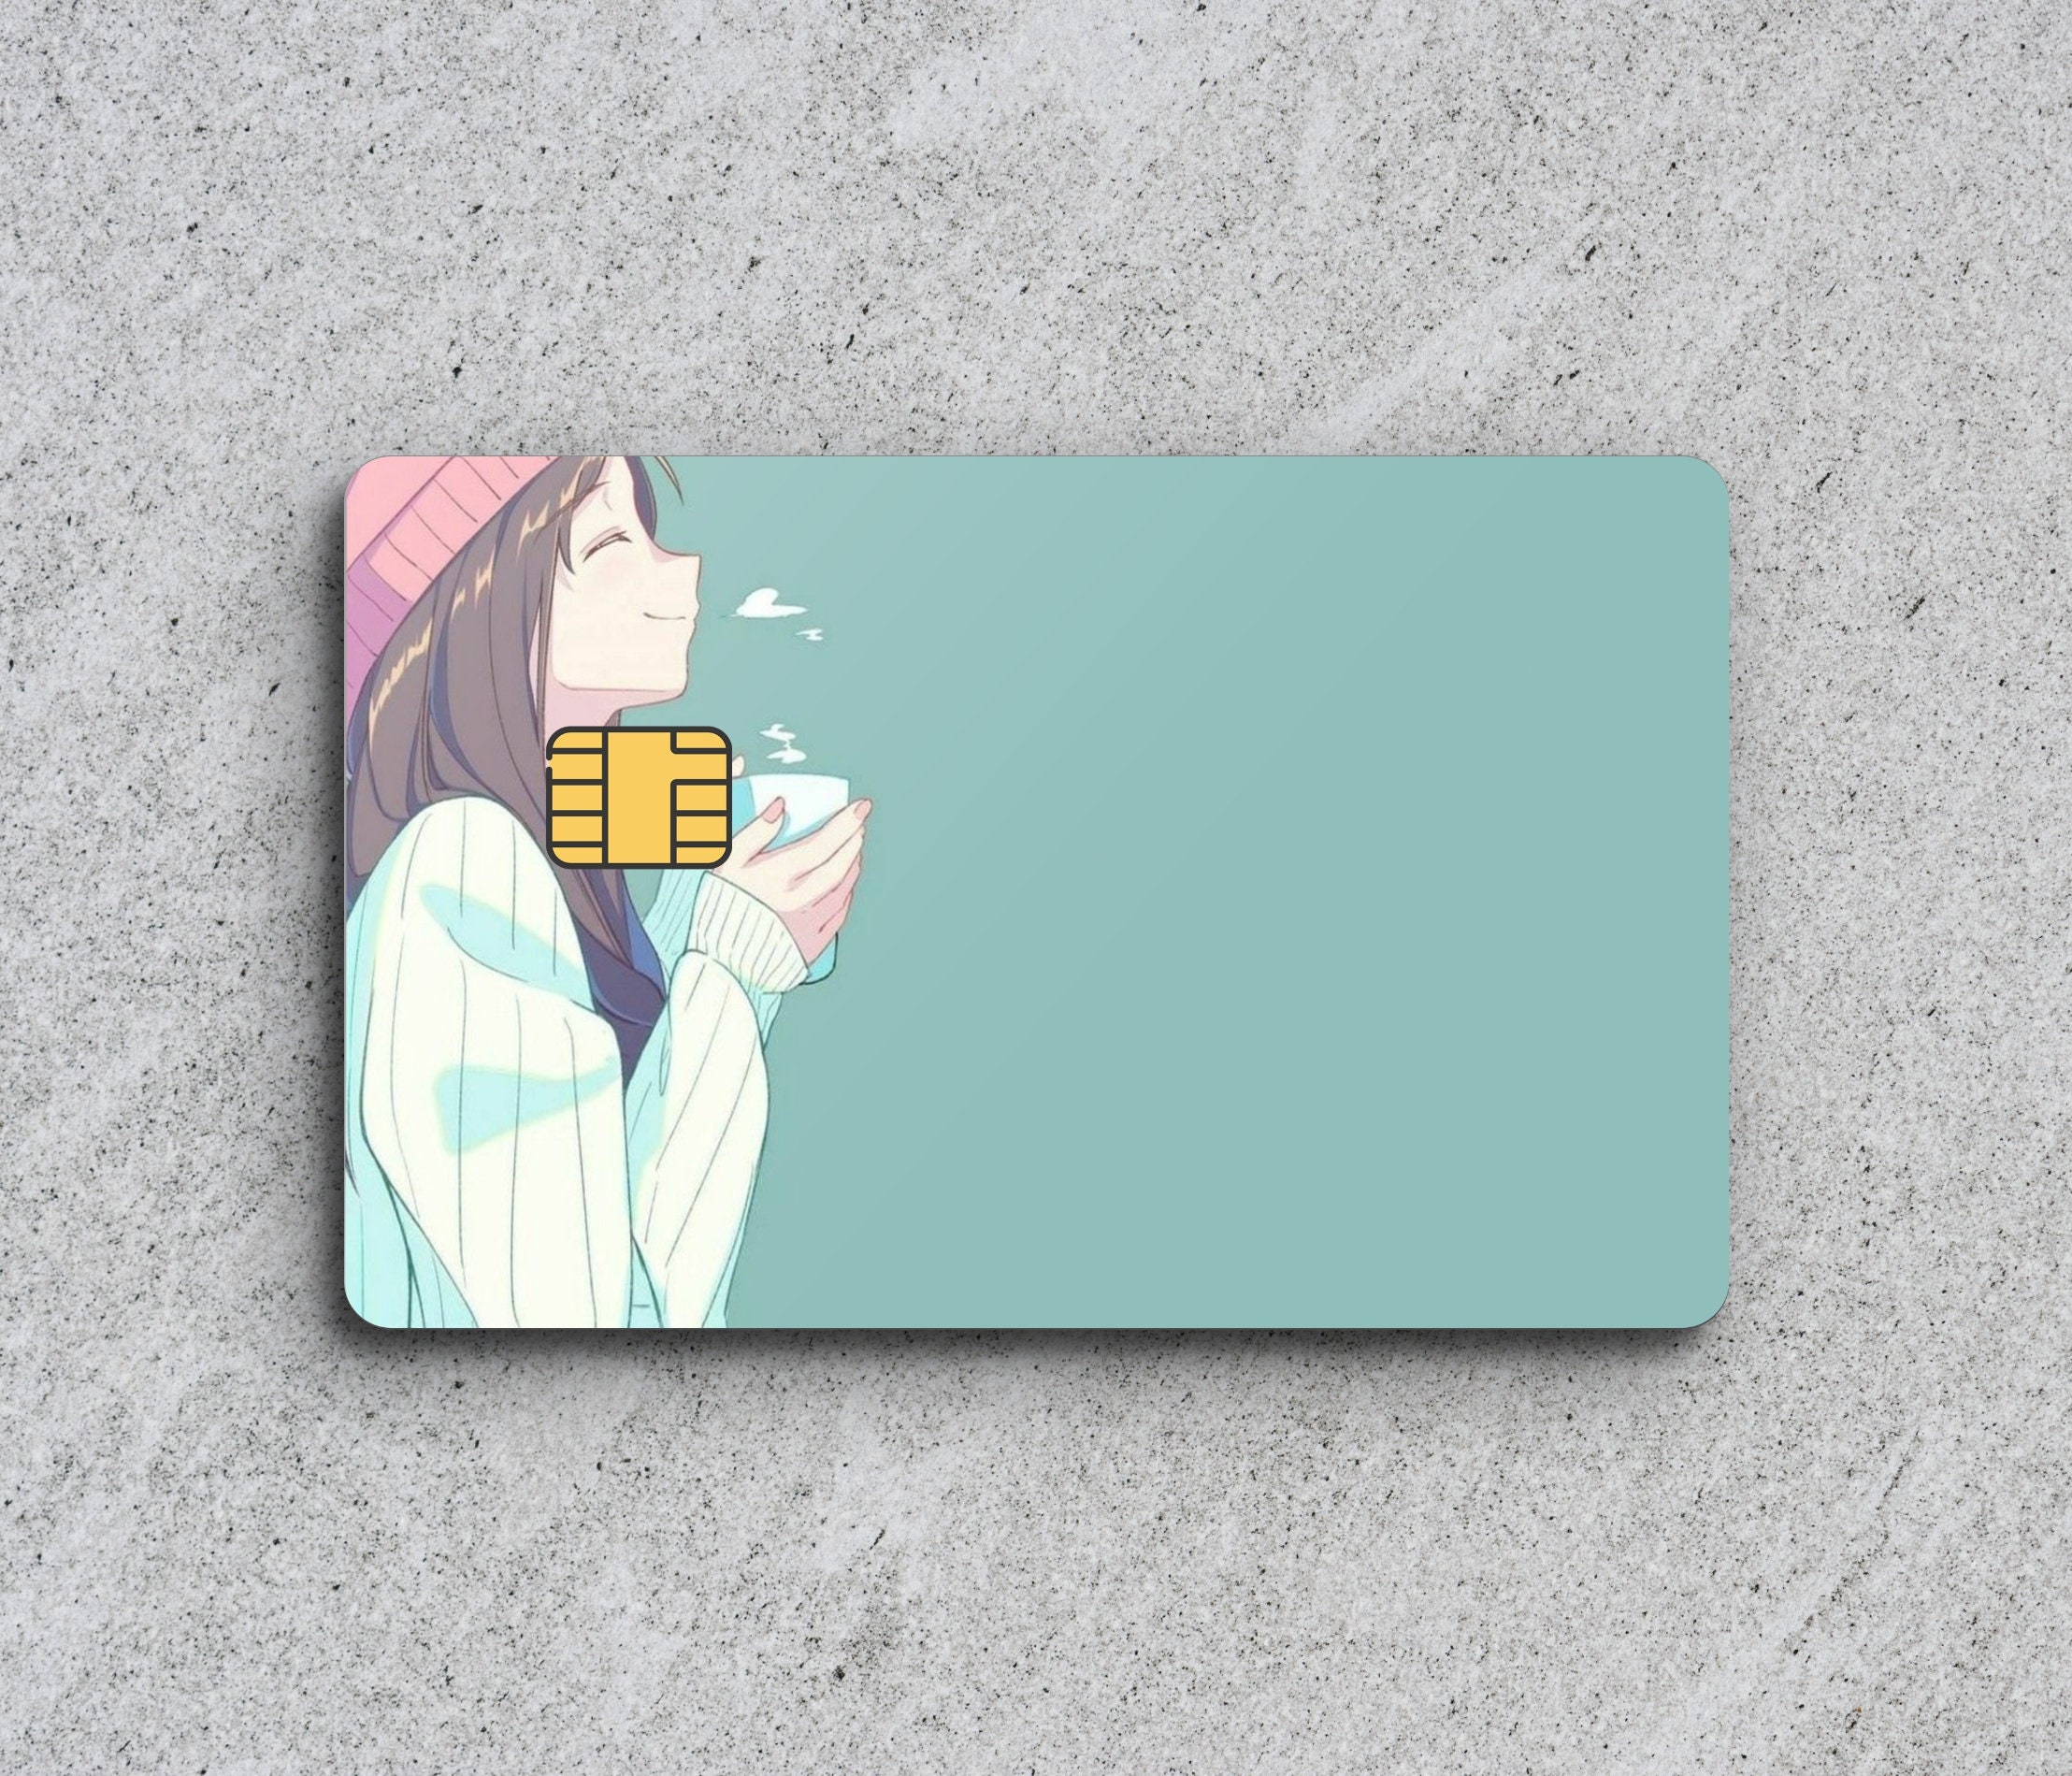 Buy Credit Card Skin Anime Online In India -  India